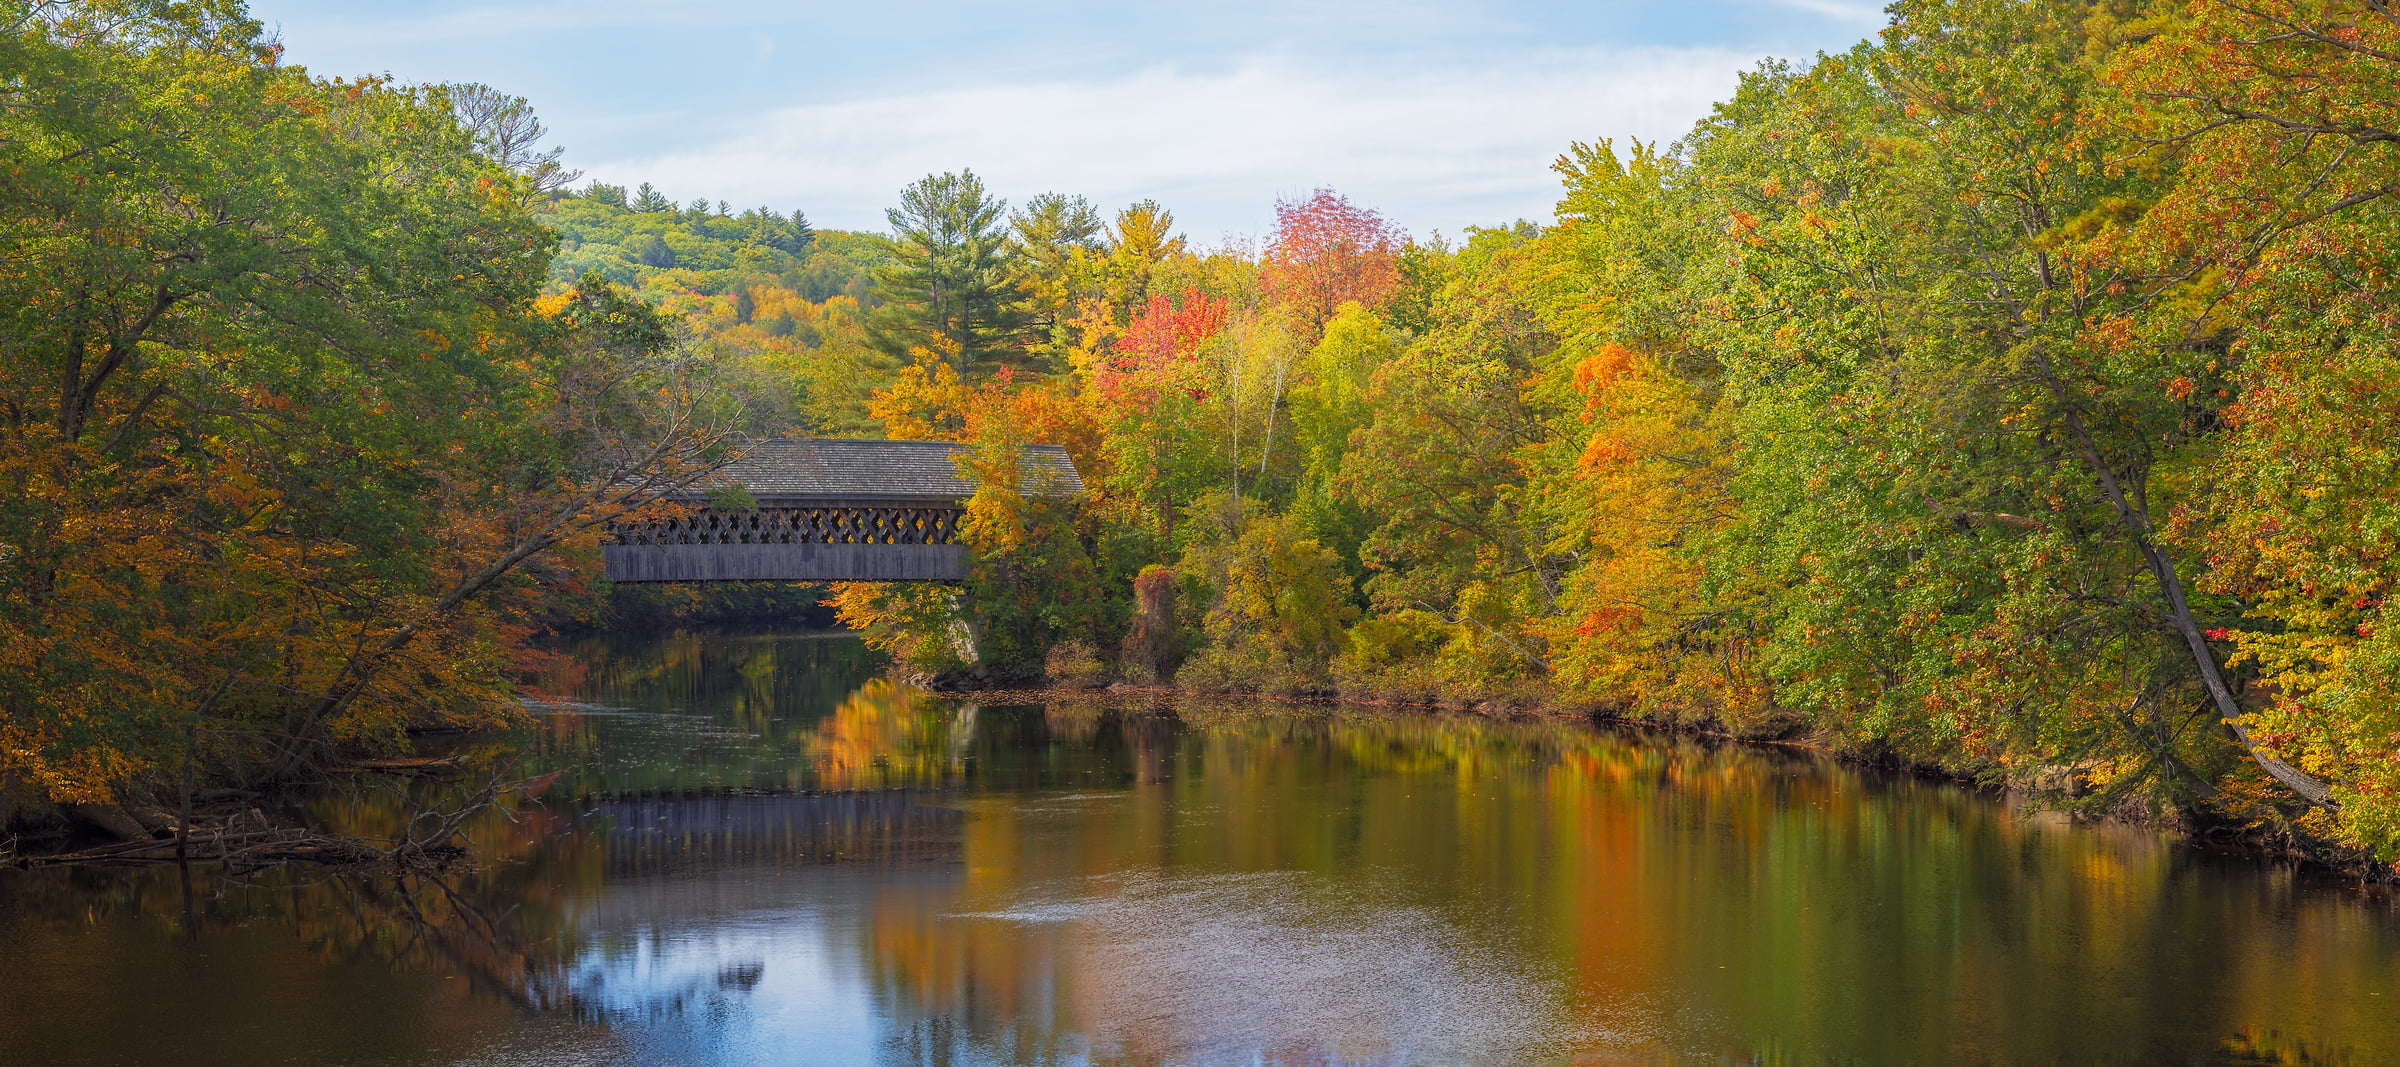 674 megapixels! A very high resolution, large-format canvas photo of a New England scene with a covered bridge of a river and autumn foliage; photograph created by John Freeman in Bridge Street, Henniker, New Hampshire